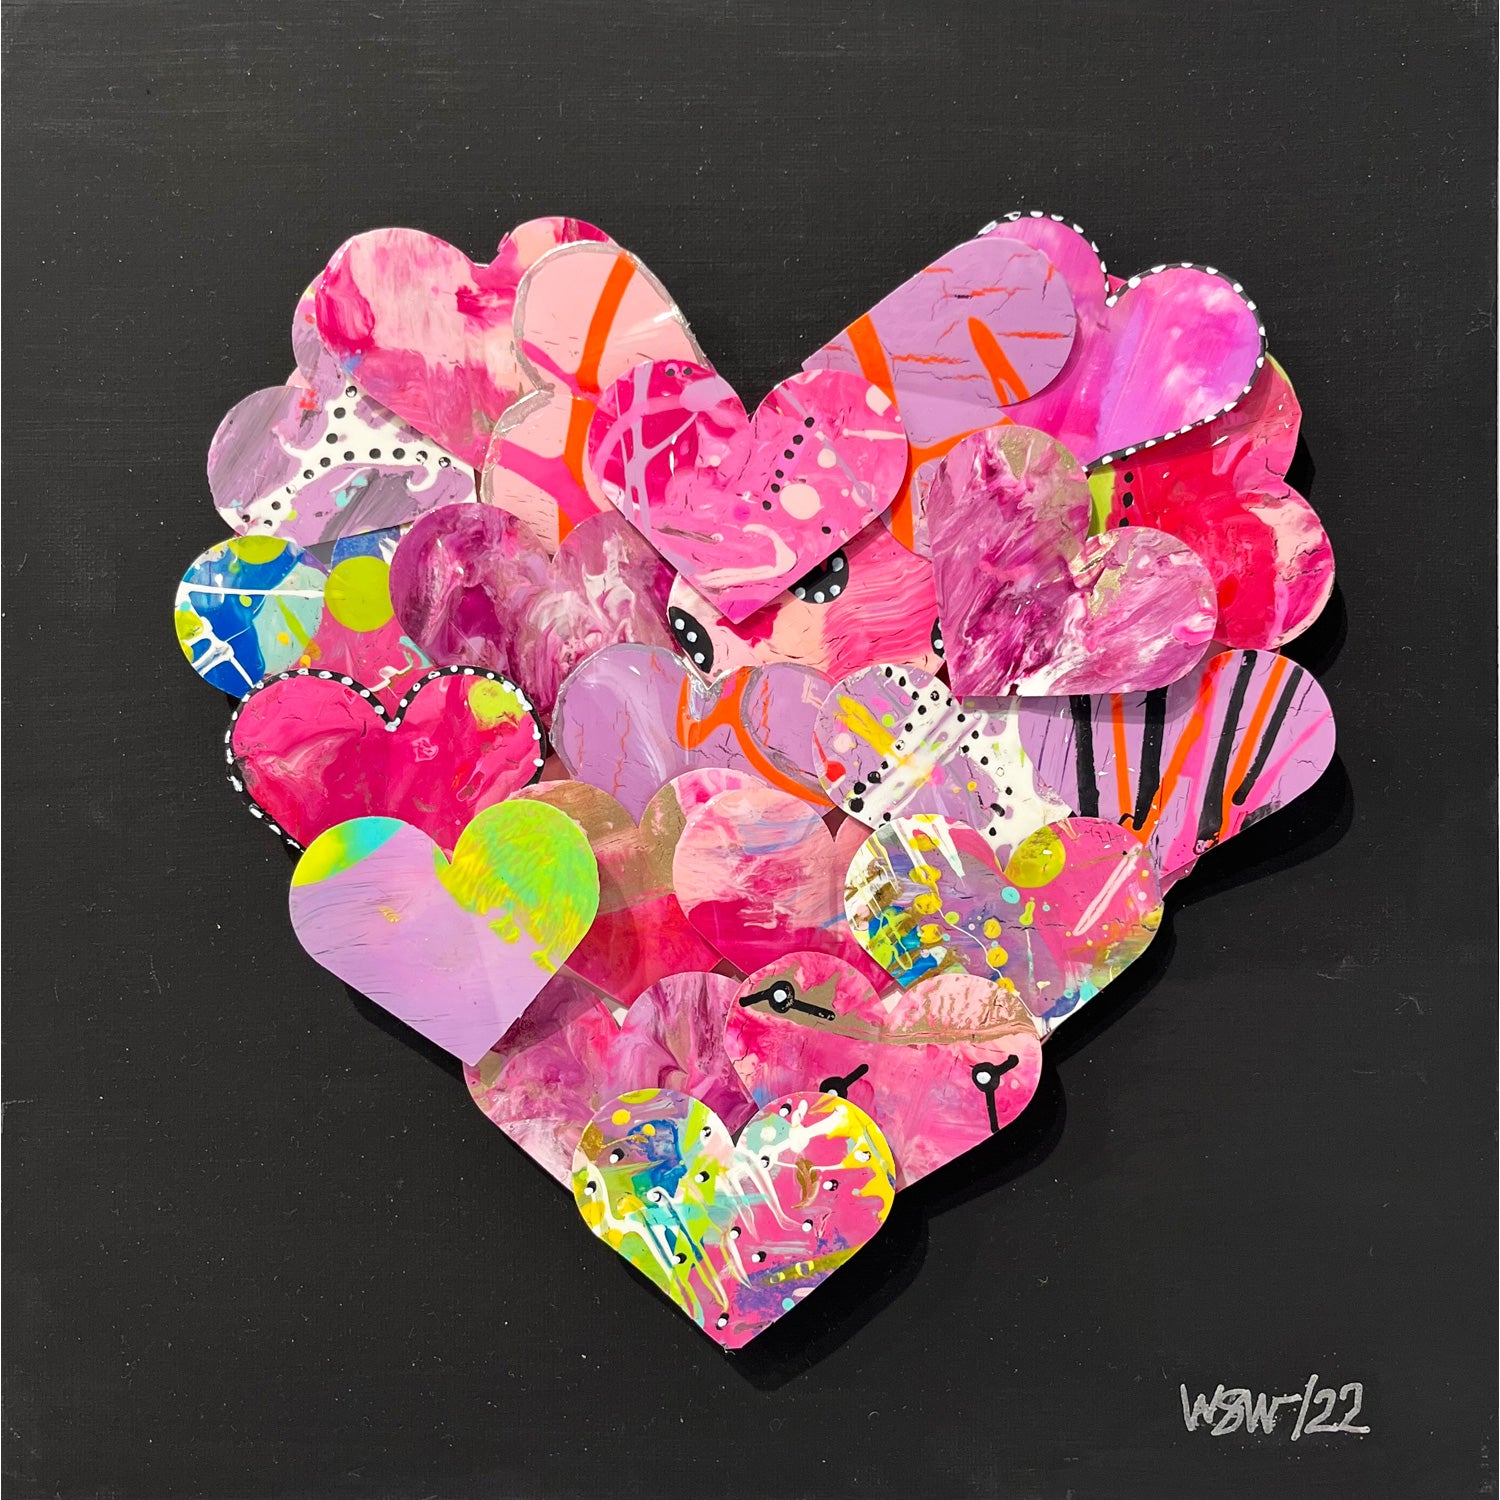 Wendy Solomon-Weizel - For the Love of Pink, 12" x 12"